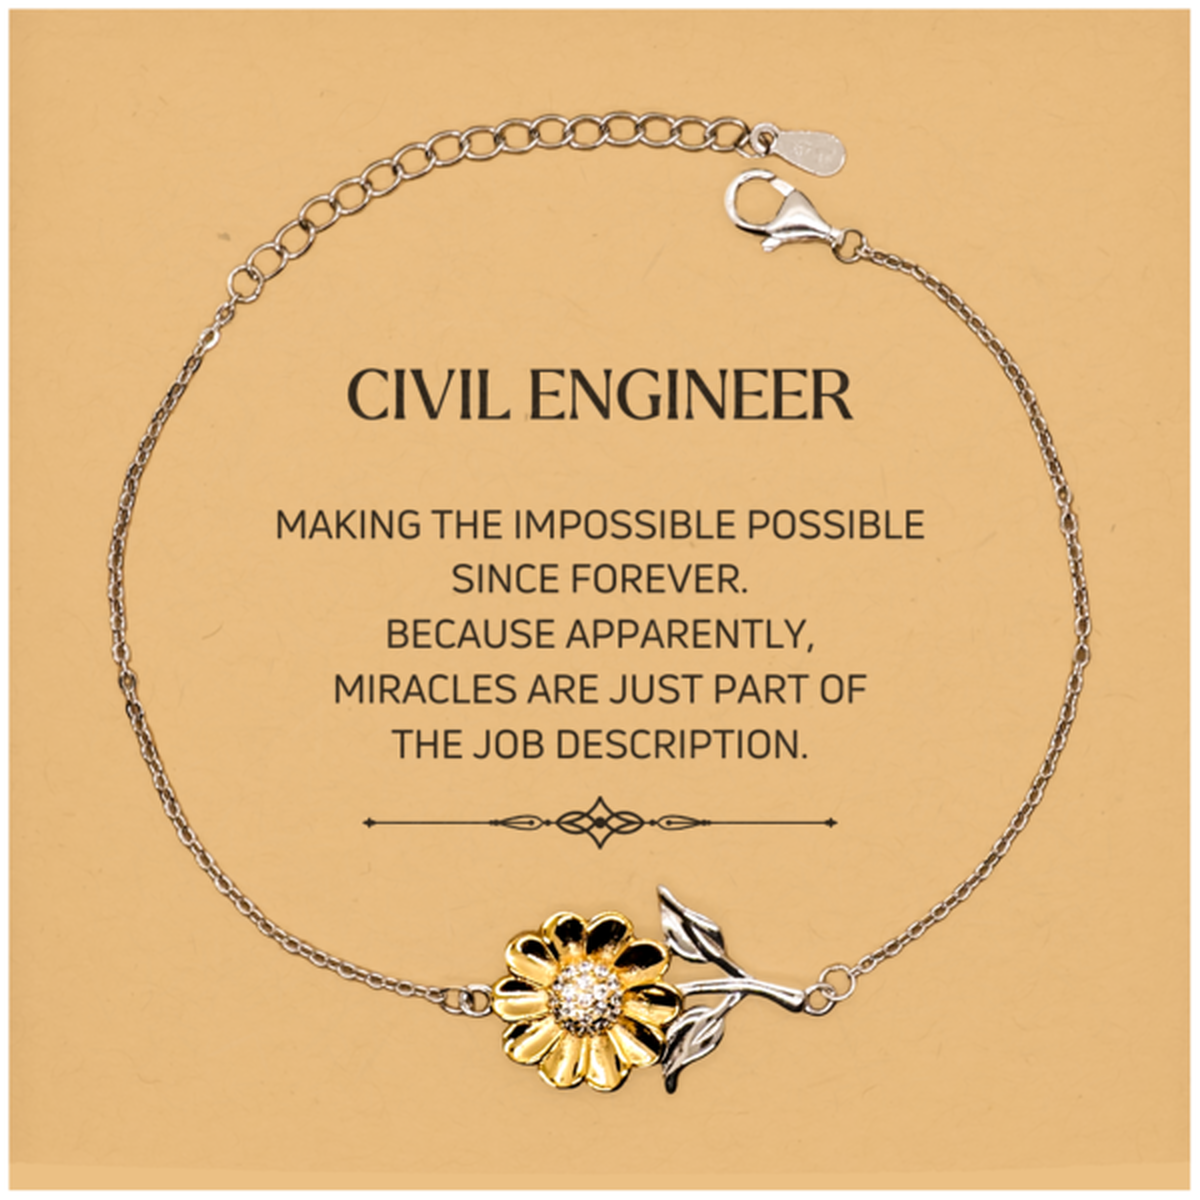 Funny Civil Engineer Gifts, Miracles are just part of the job description, Inspirational Birthday Christmas Sunflower Bracelet For Civil Engineer, Men, Women, Coworkers, Friends, Boss